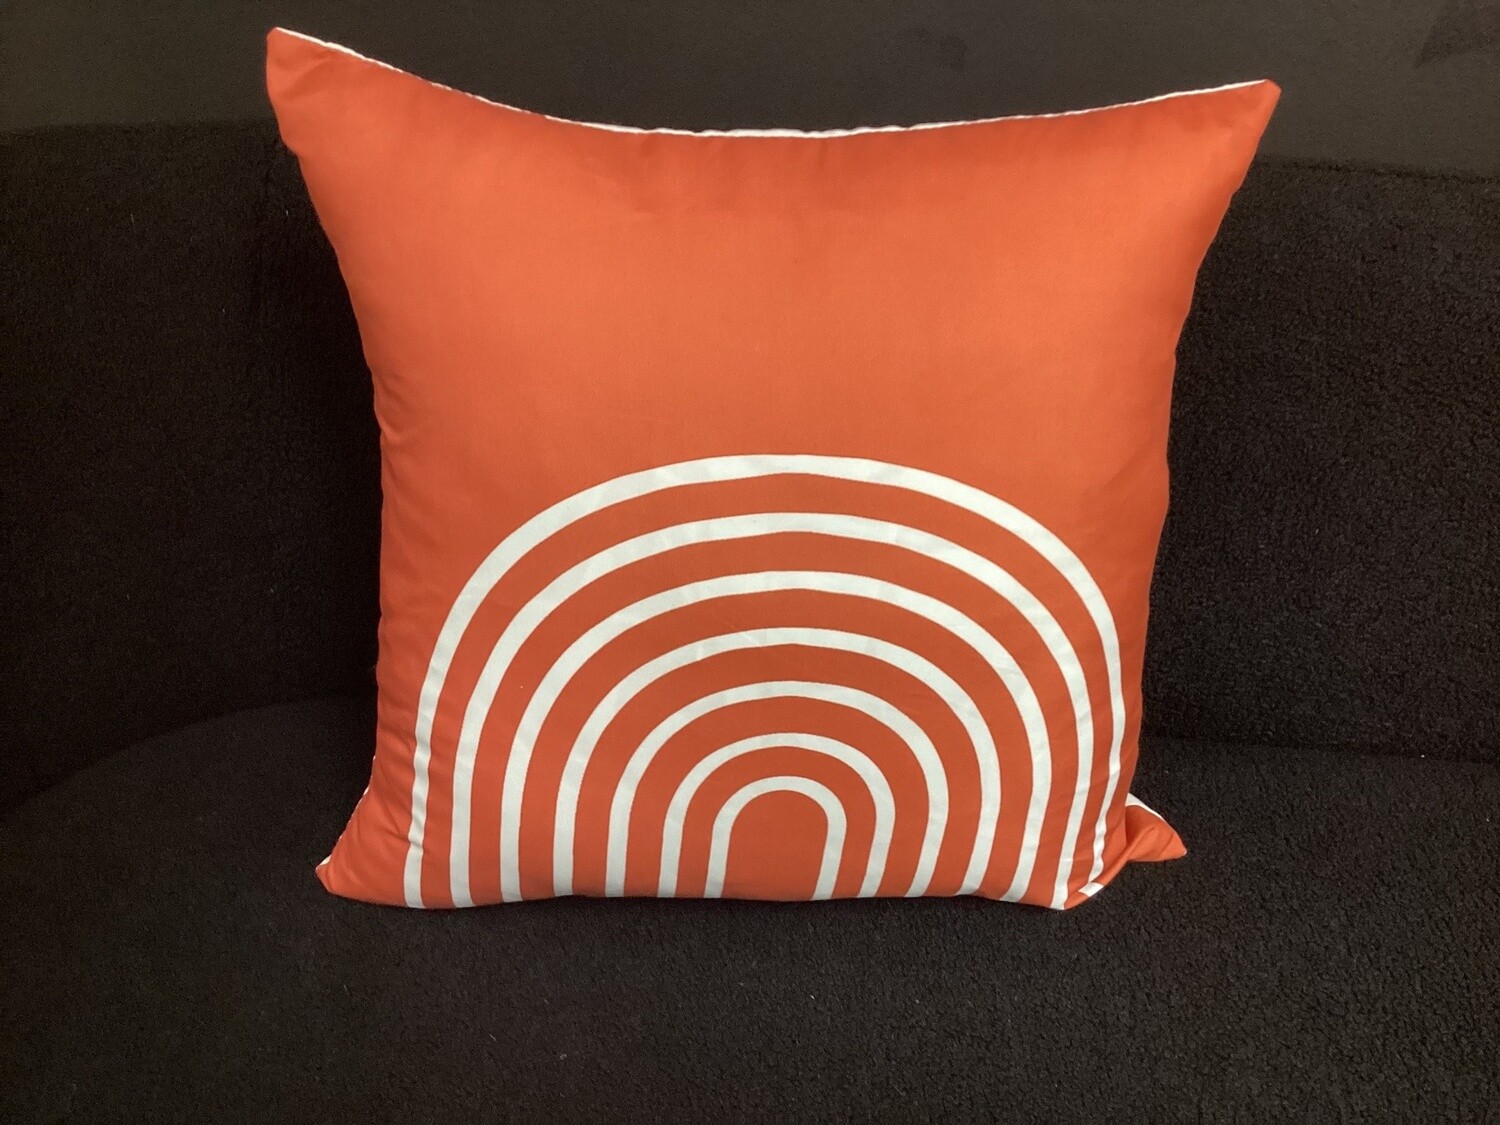 Orange Pillow Cover With Curves (18”x18”)